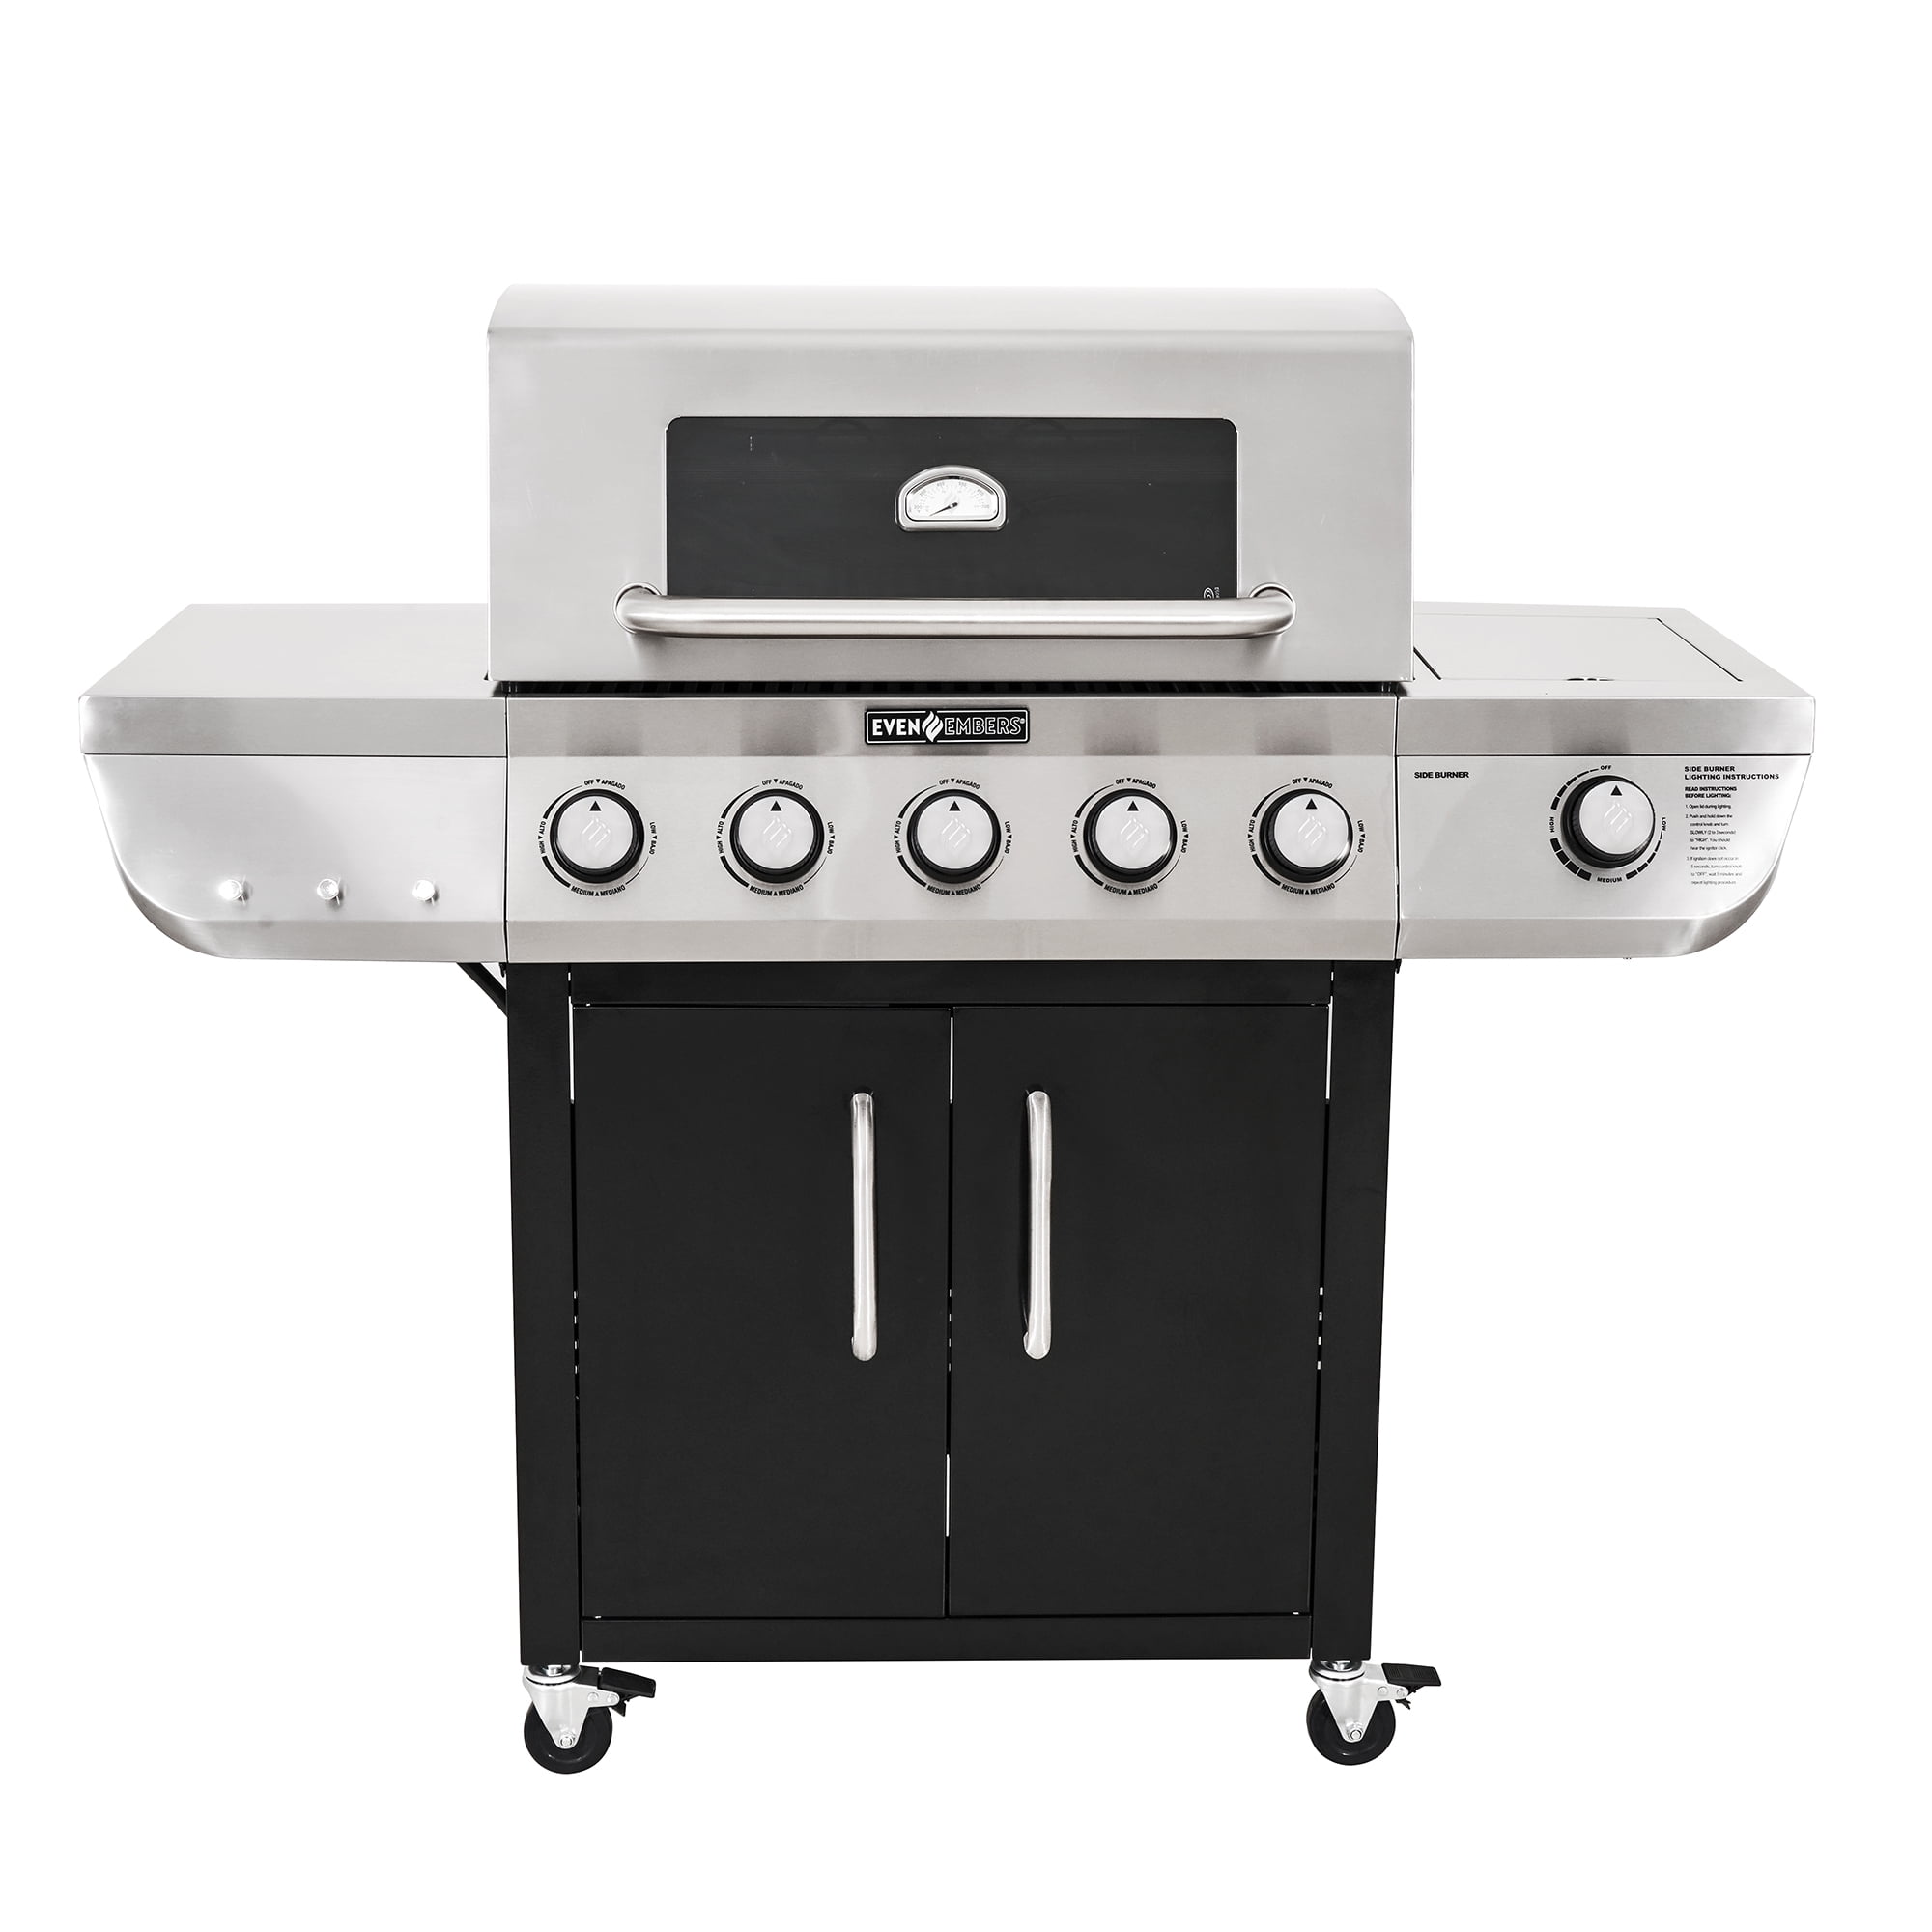 Even Embers Four Burner Gas Grill